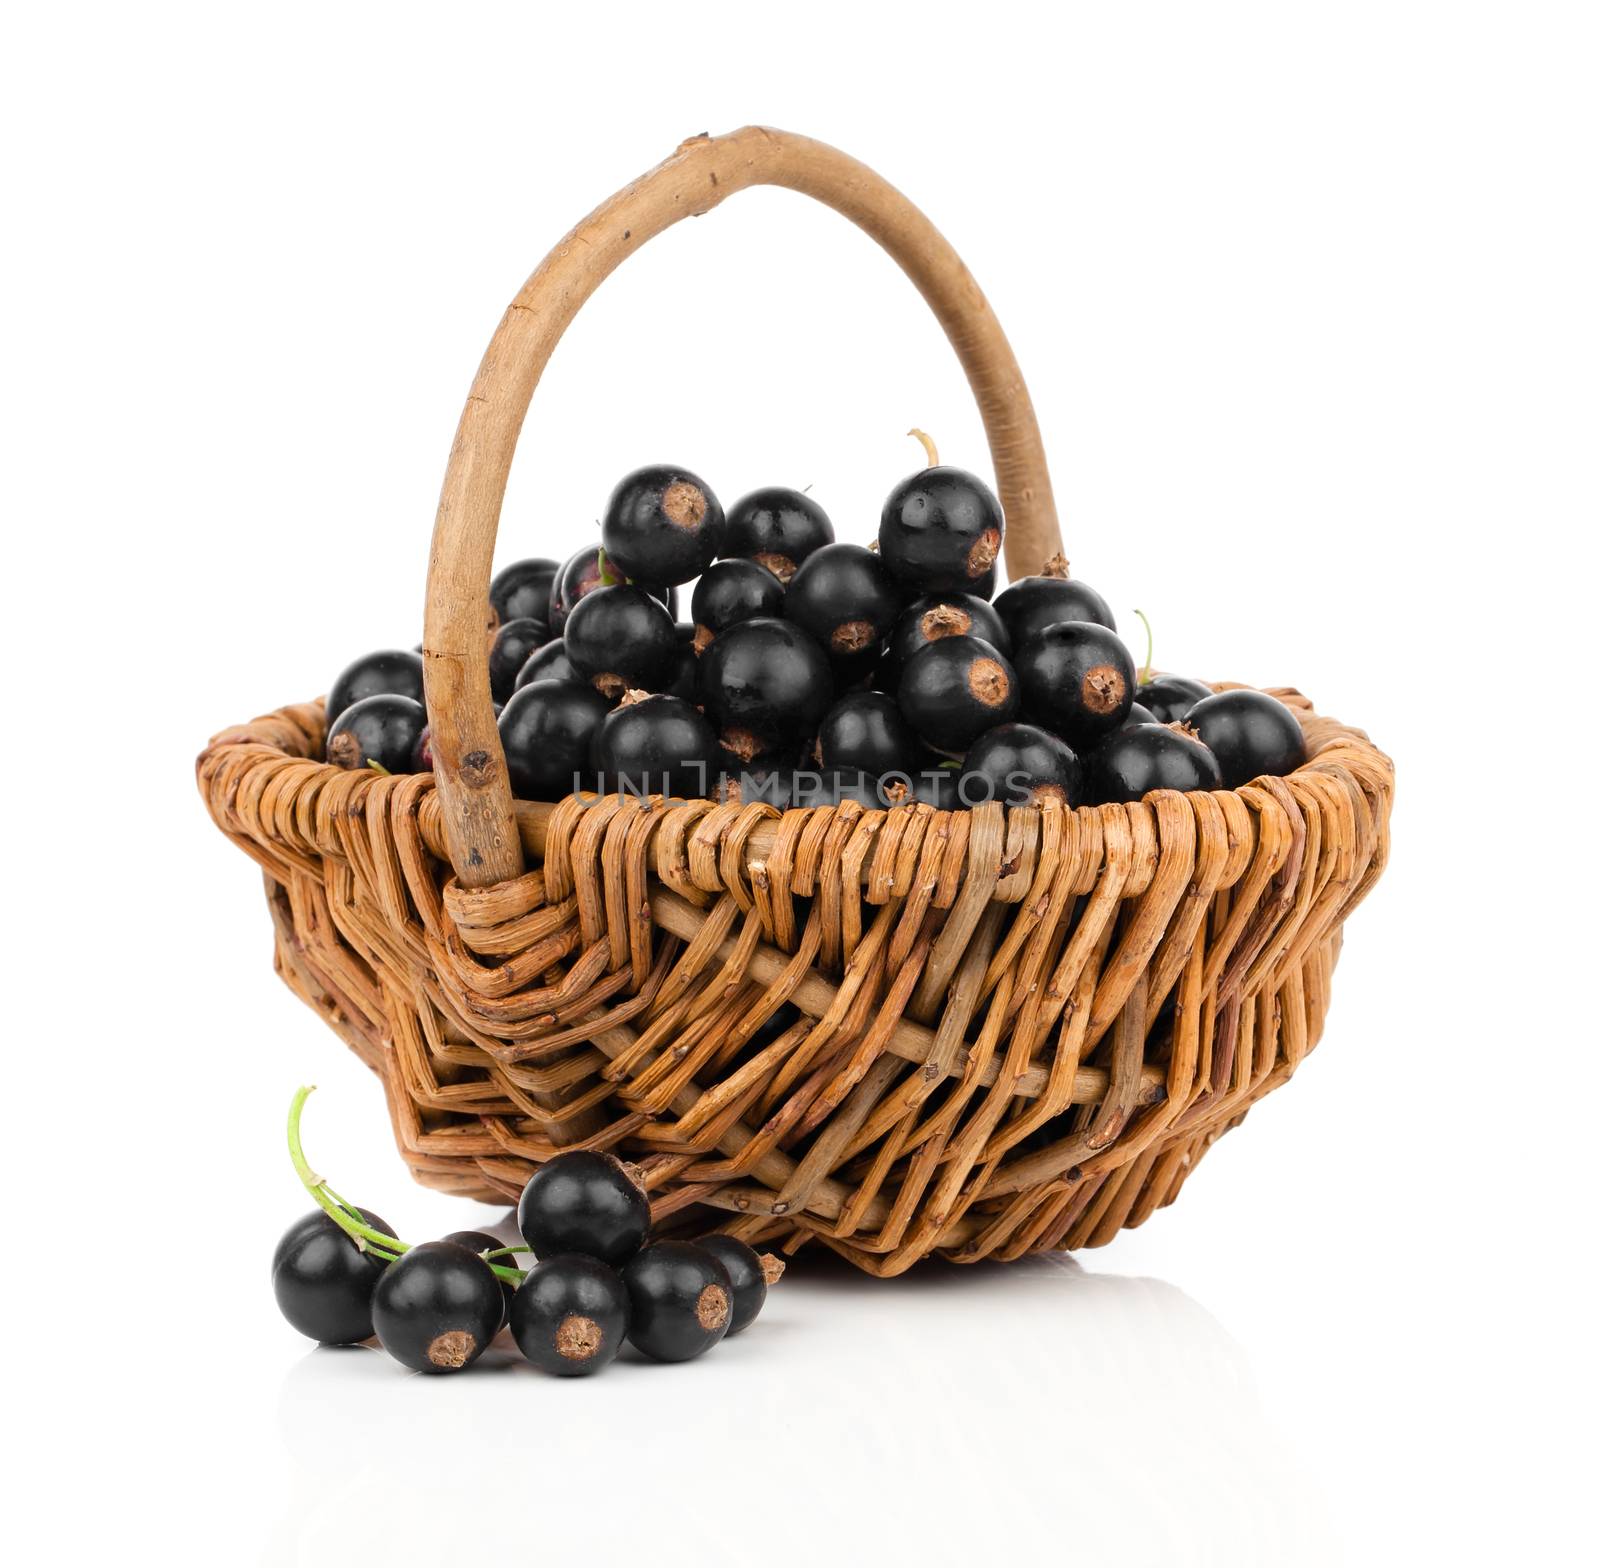 Basket with black currant on a white background